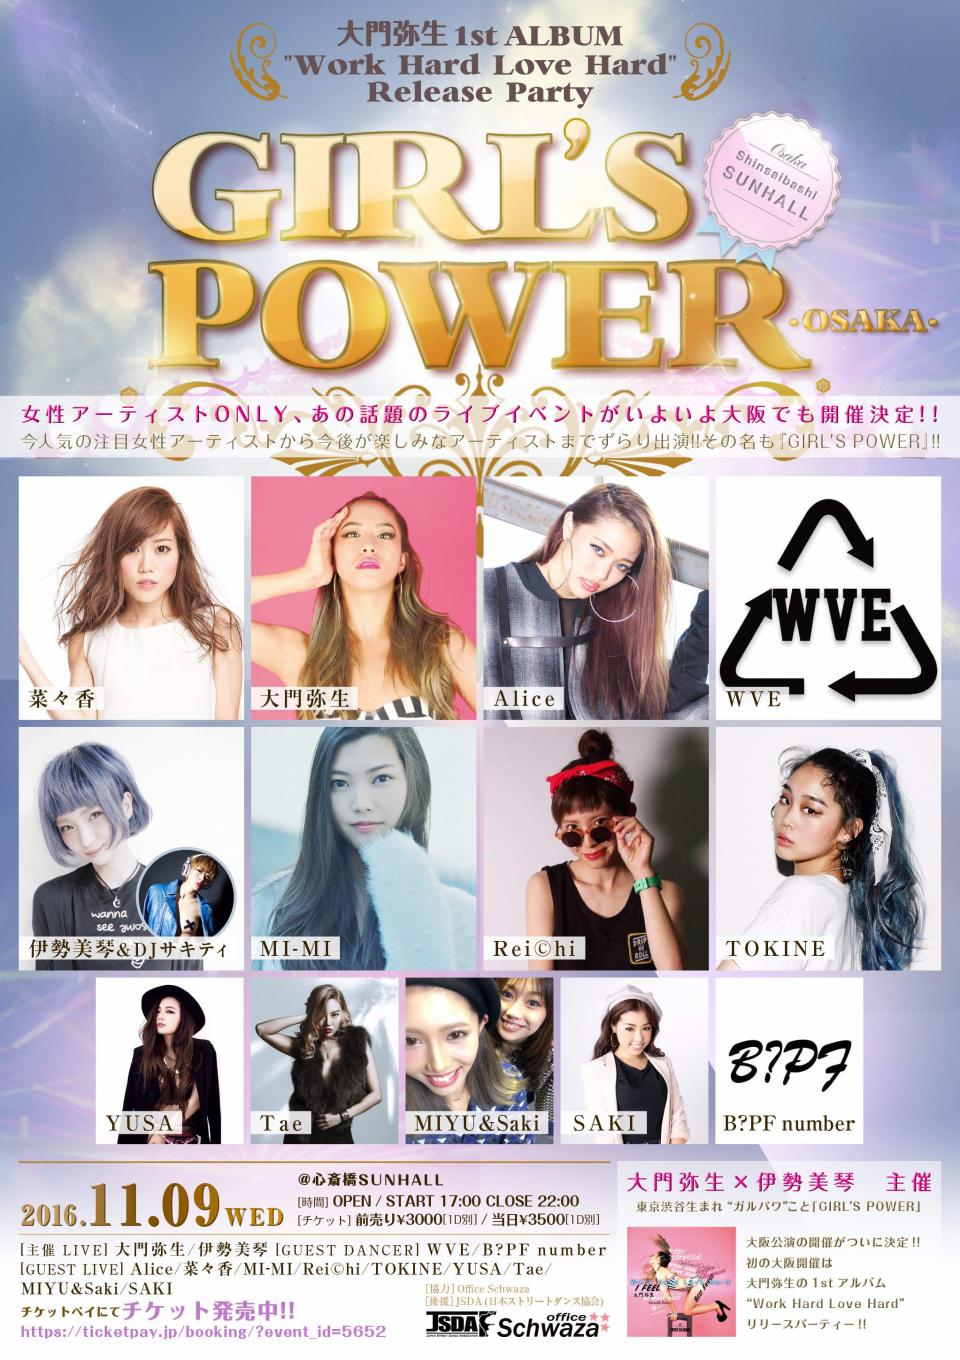 1st ALBUM Release Partyとして主催イベントGIRL'S POWERの開催が決定!